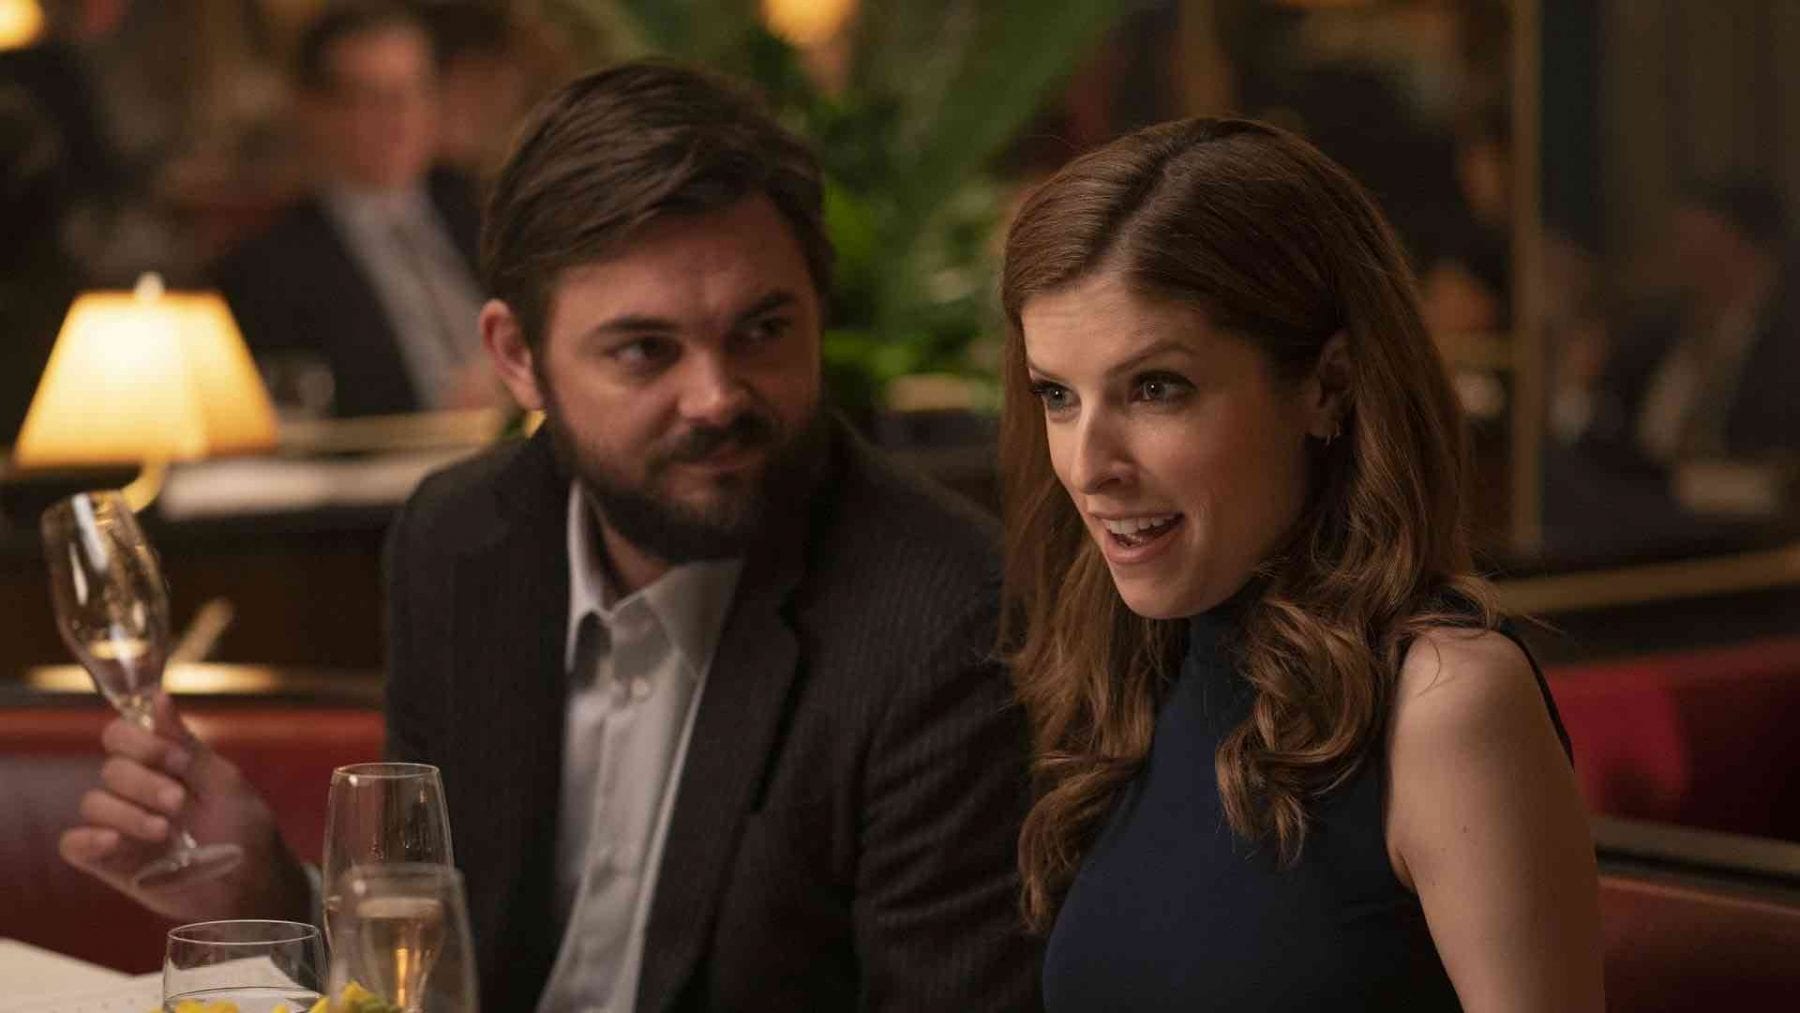 Magnus and Darby (Nick Thune and Anna Kendrick) sit in a restaurant together. Magnus looks at Darby, and Darby looks in bewilderment at an unseen dinner guest.